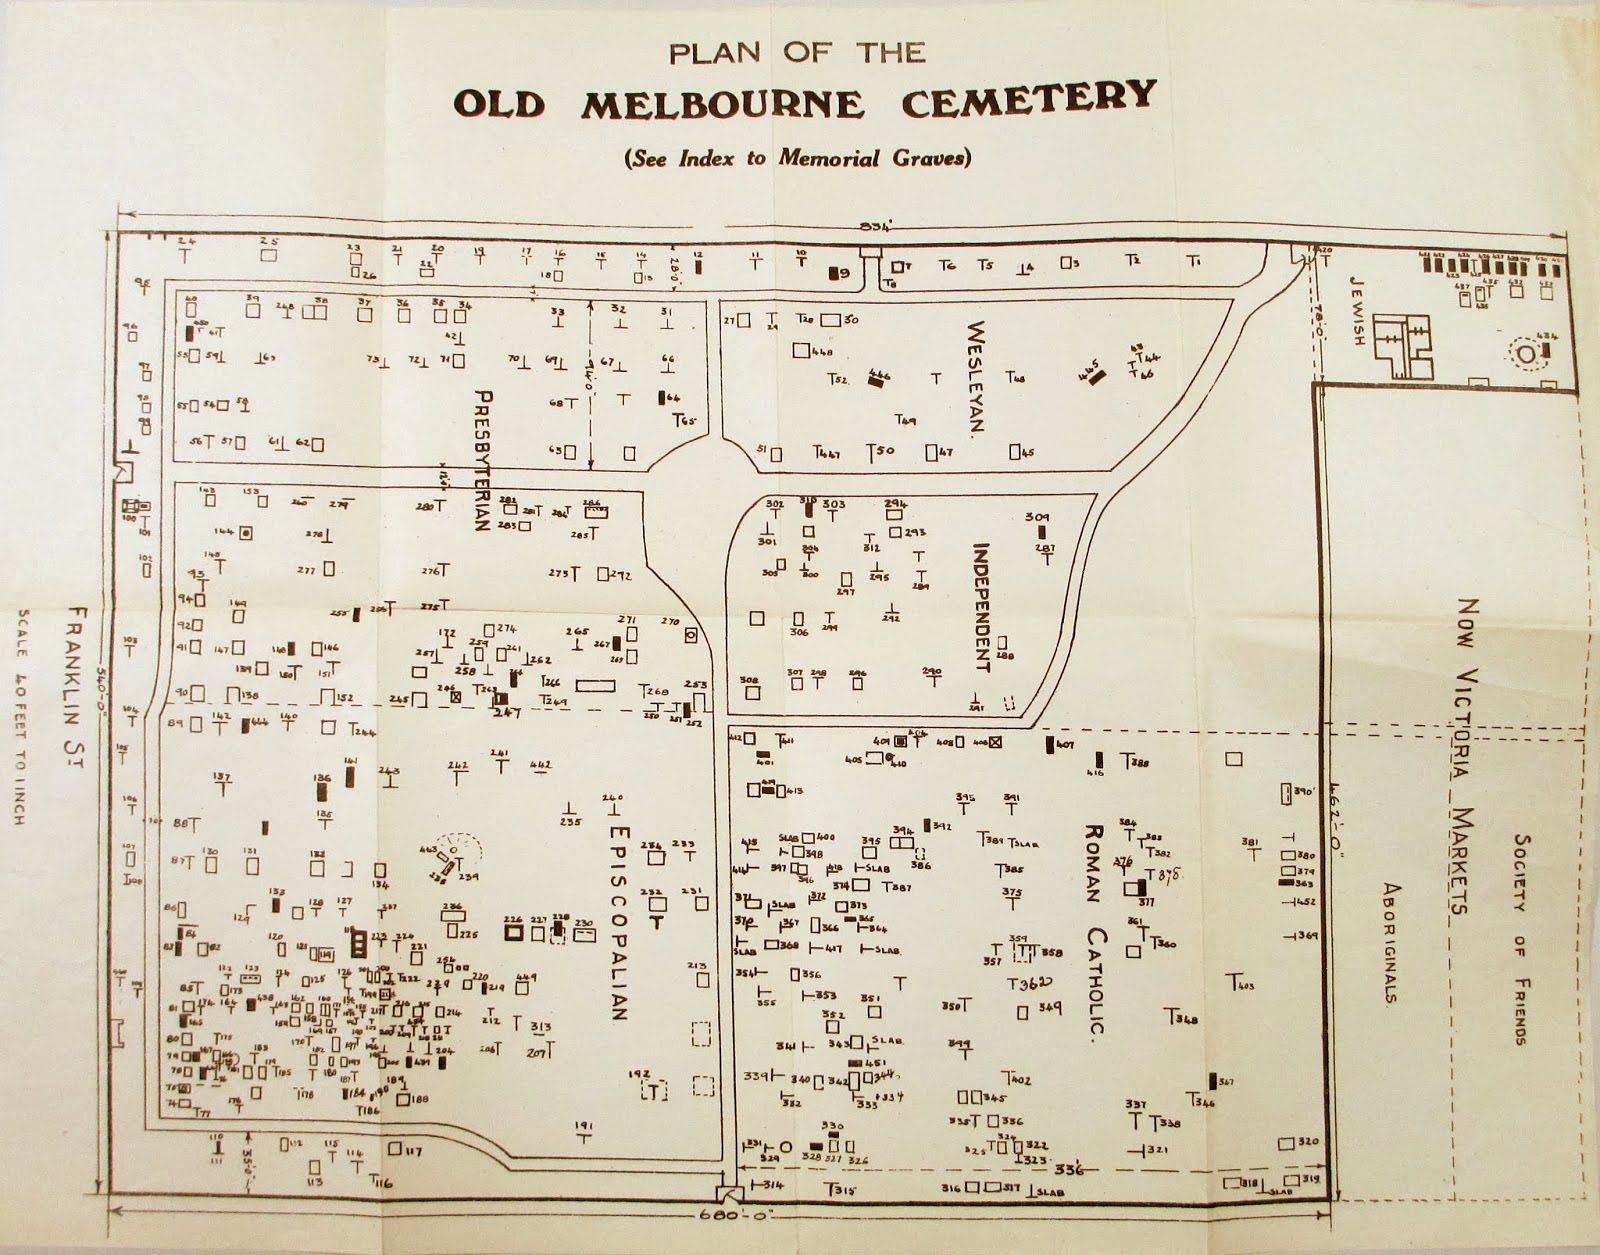 [Old Melbourne Cemetery Plan]